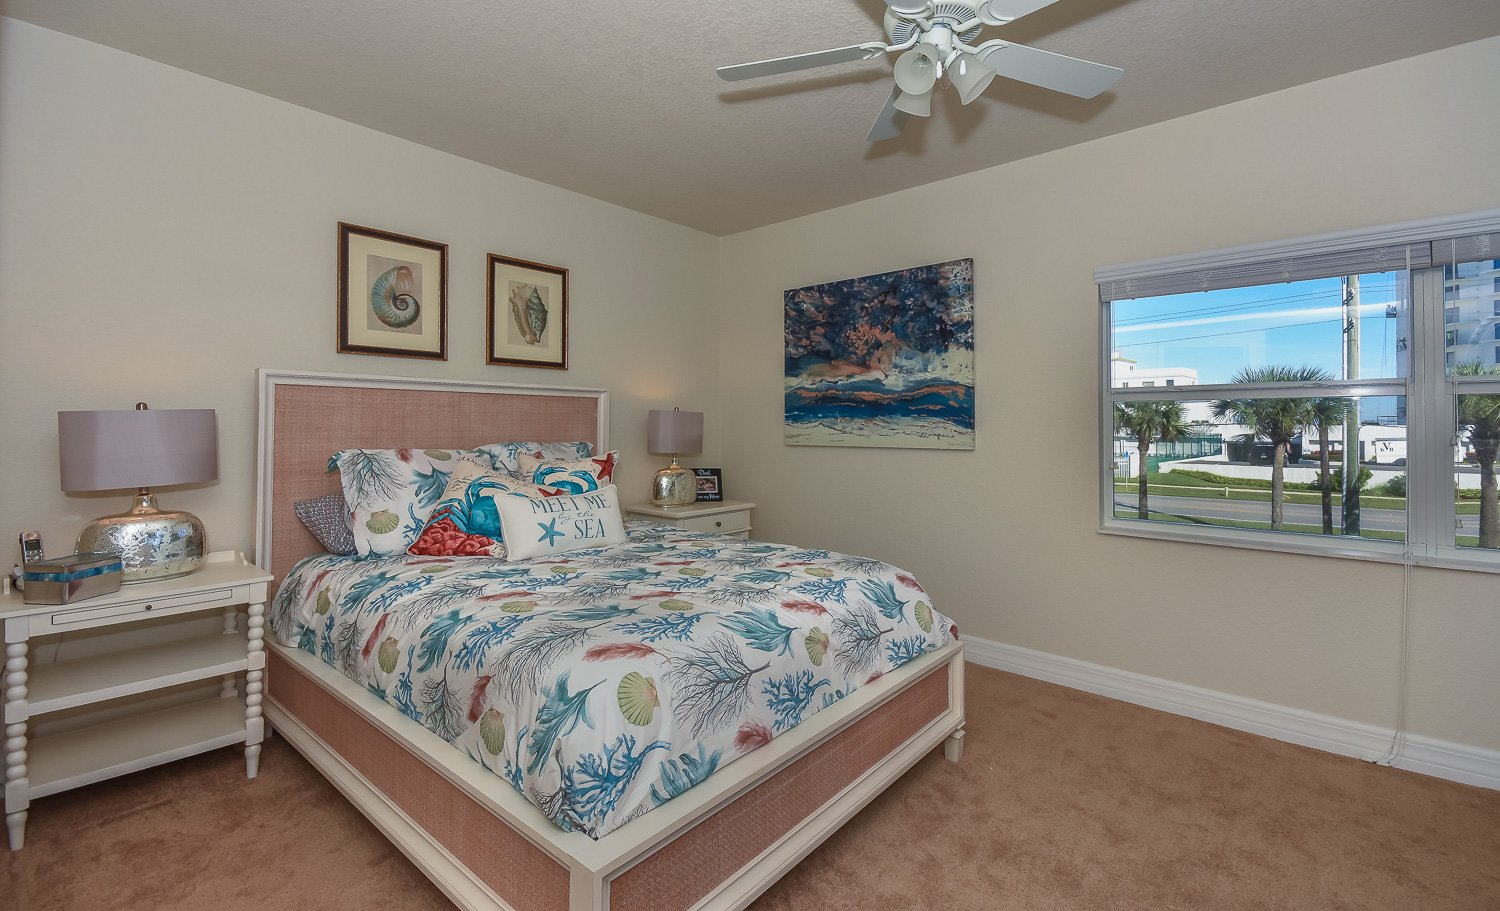 Bedroom in our condo for rent in New Smyrna Beach FL